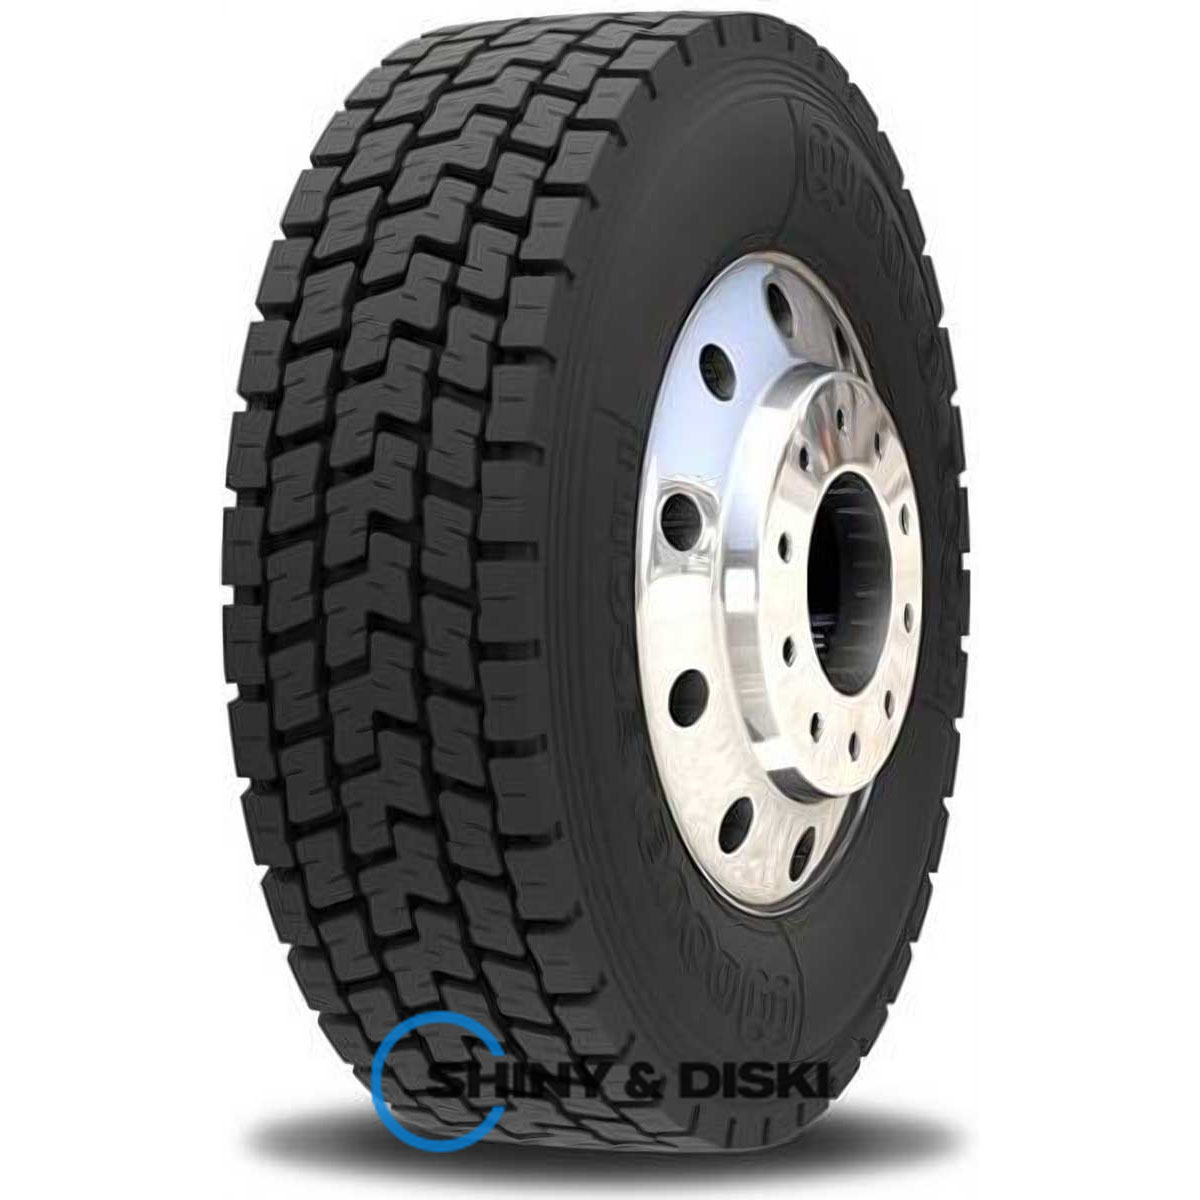 double coin rlb450 (ведущая ось) 315/70 r22.5 152/148m